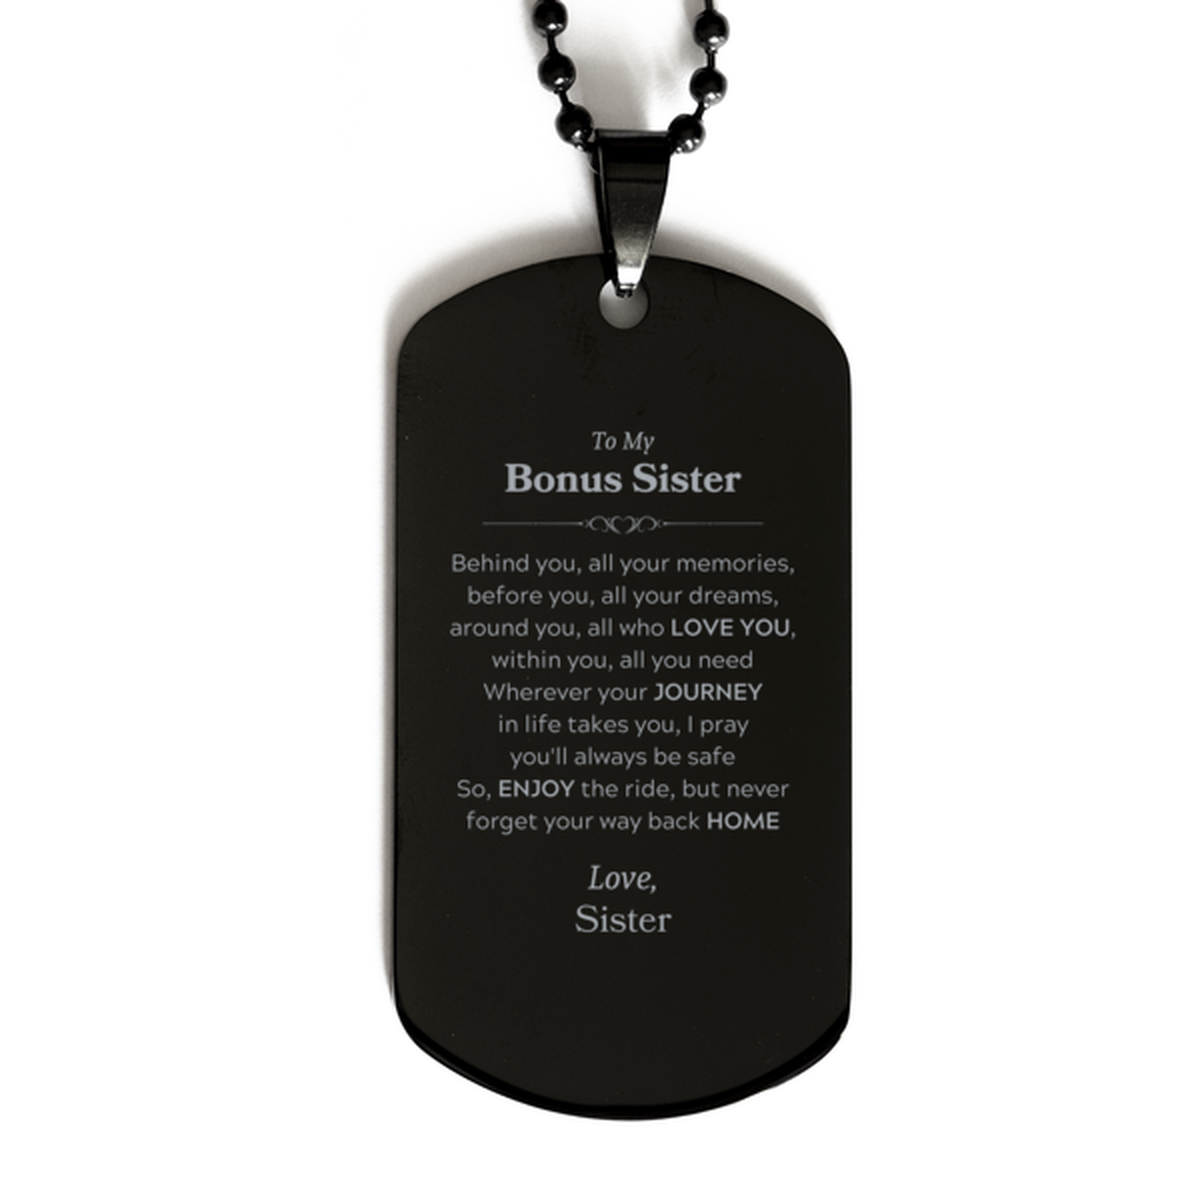 To My Bonus Sister Graduation Gifts from Sister, Bonus Sister Black Dog Tag Christmas Birthday Gifts for Bonus Sister Behind you, all your memories, before you, all your dreams. Love, Sister